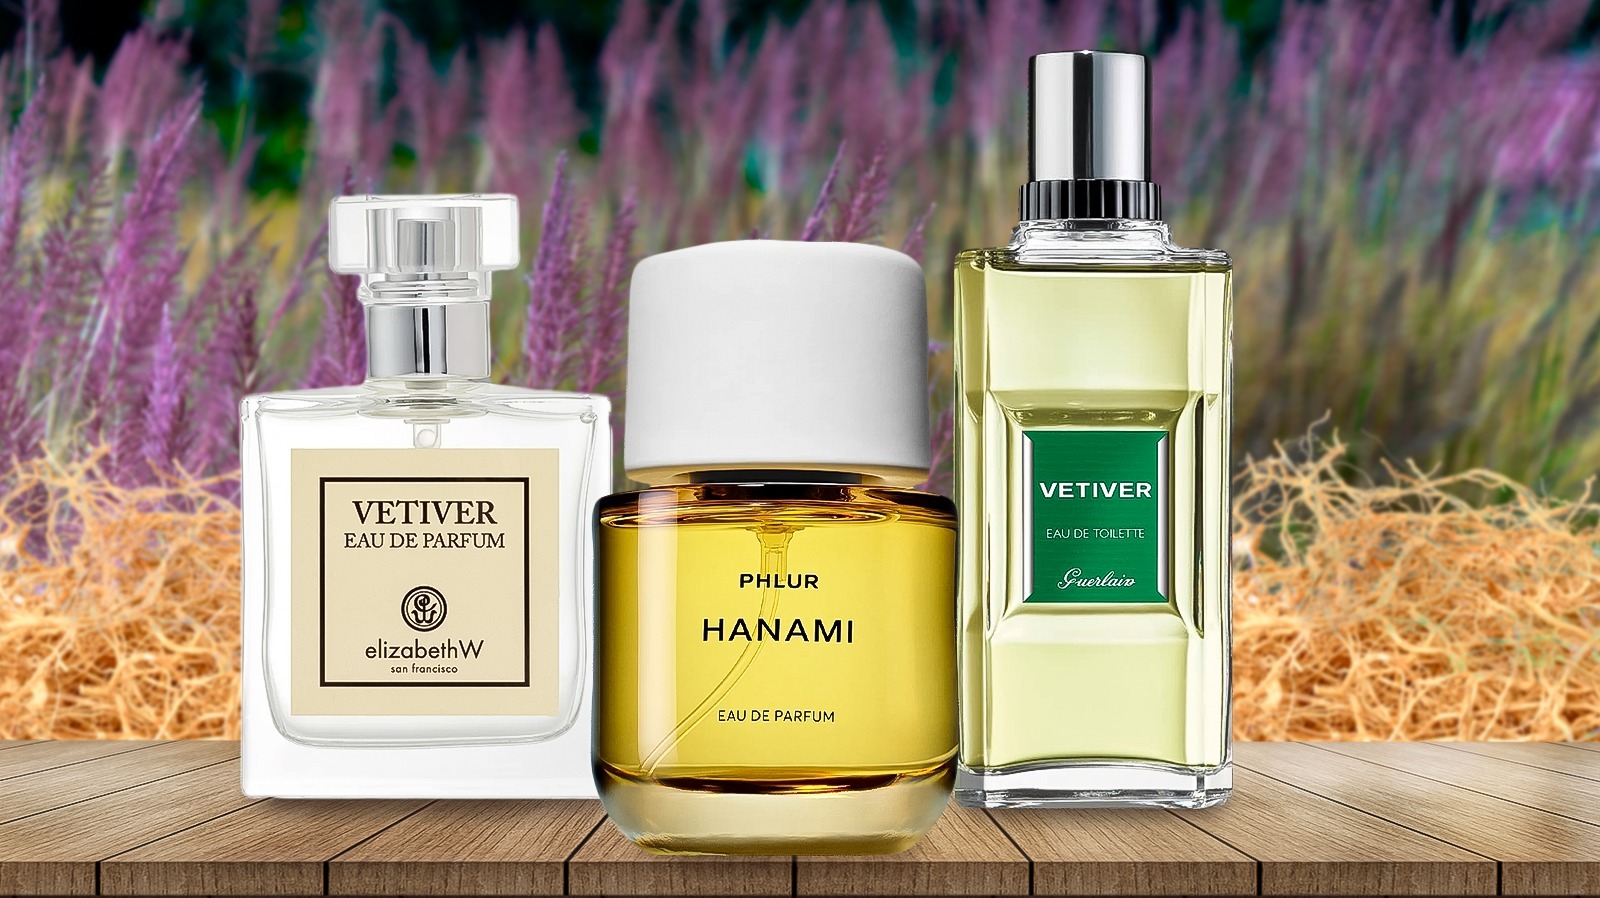 What Fragrance Notes Do Vetiver Perfume Scents Hit?